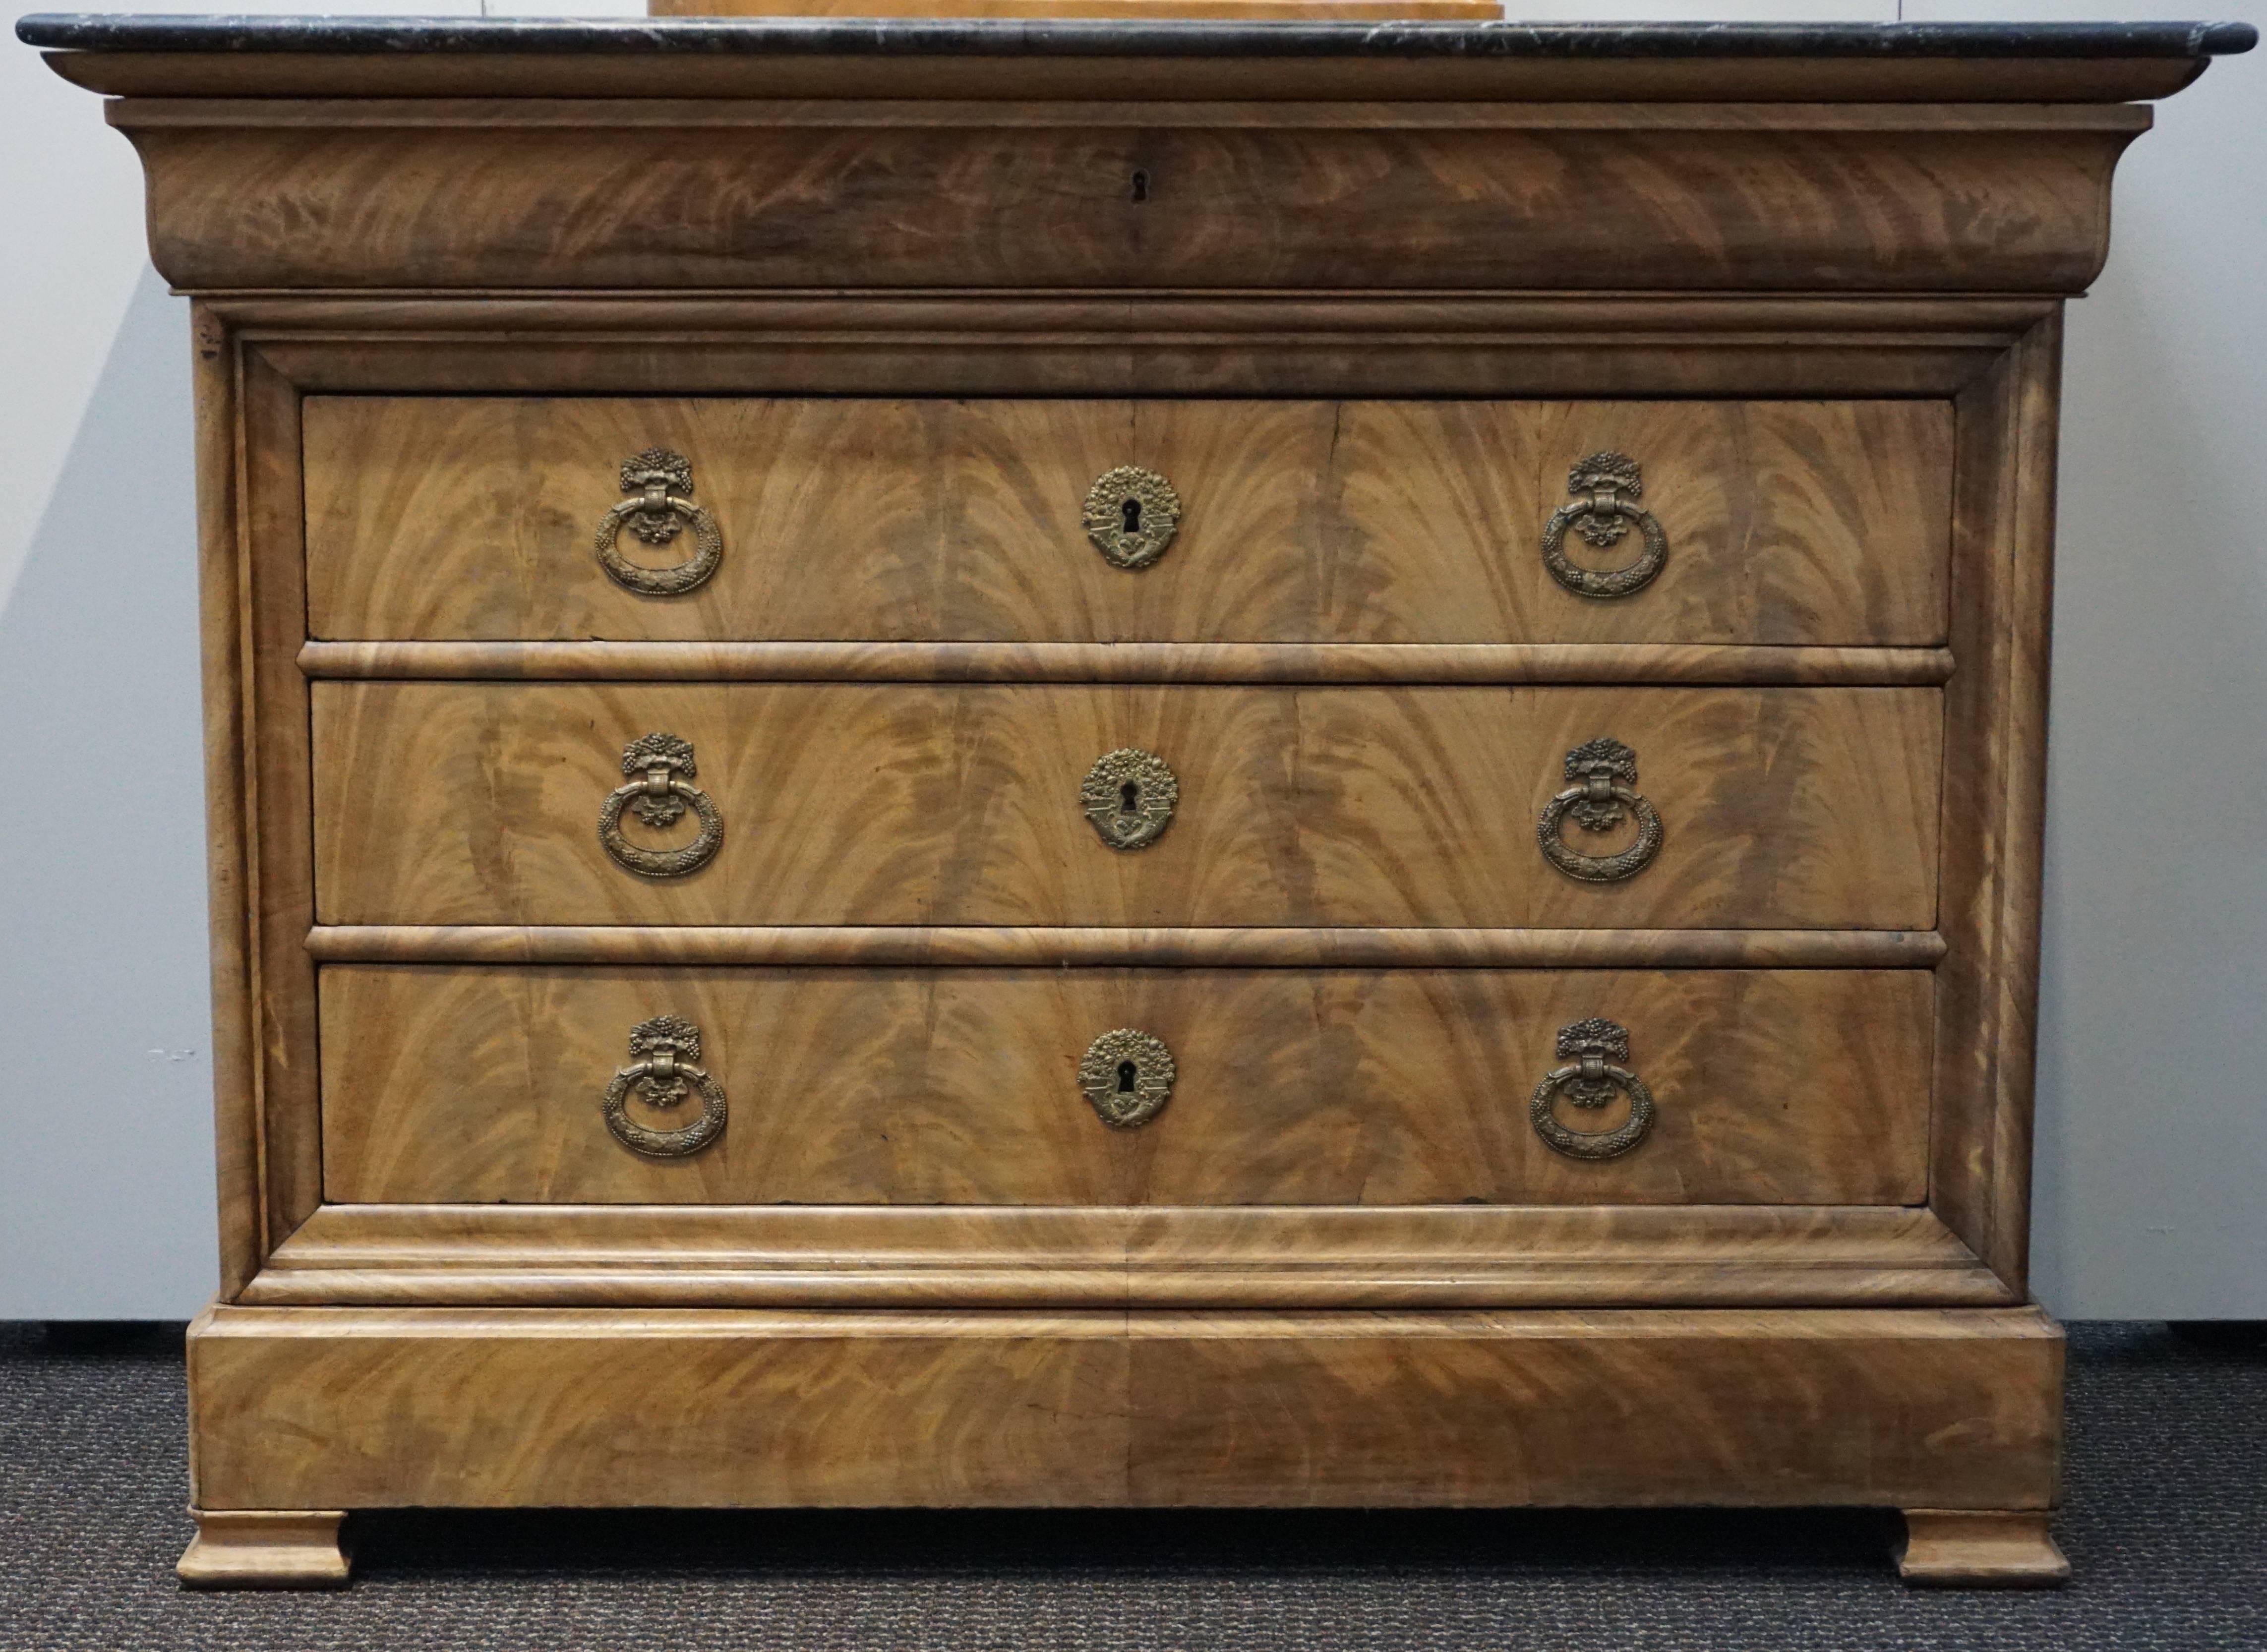 A Louis Philippe French mahogany and black marble chest with hidden drawer at the base, 19th century. Two keys to working locks included!

Dimensions: 37.25 H x 50.25 W x 22.25 D inches 
(94.6 x 127.6 x 56.5 cm)

Lower apron near feet extends